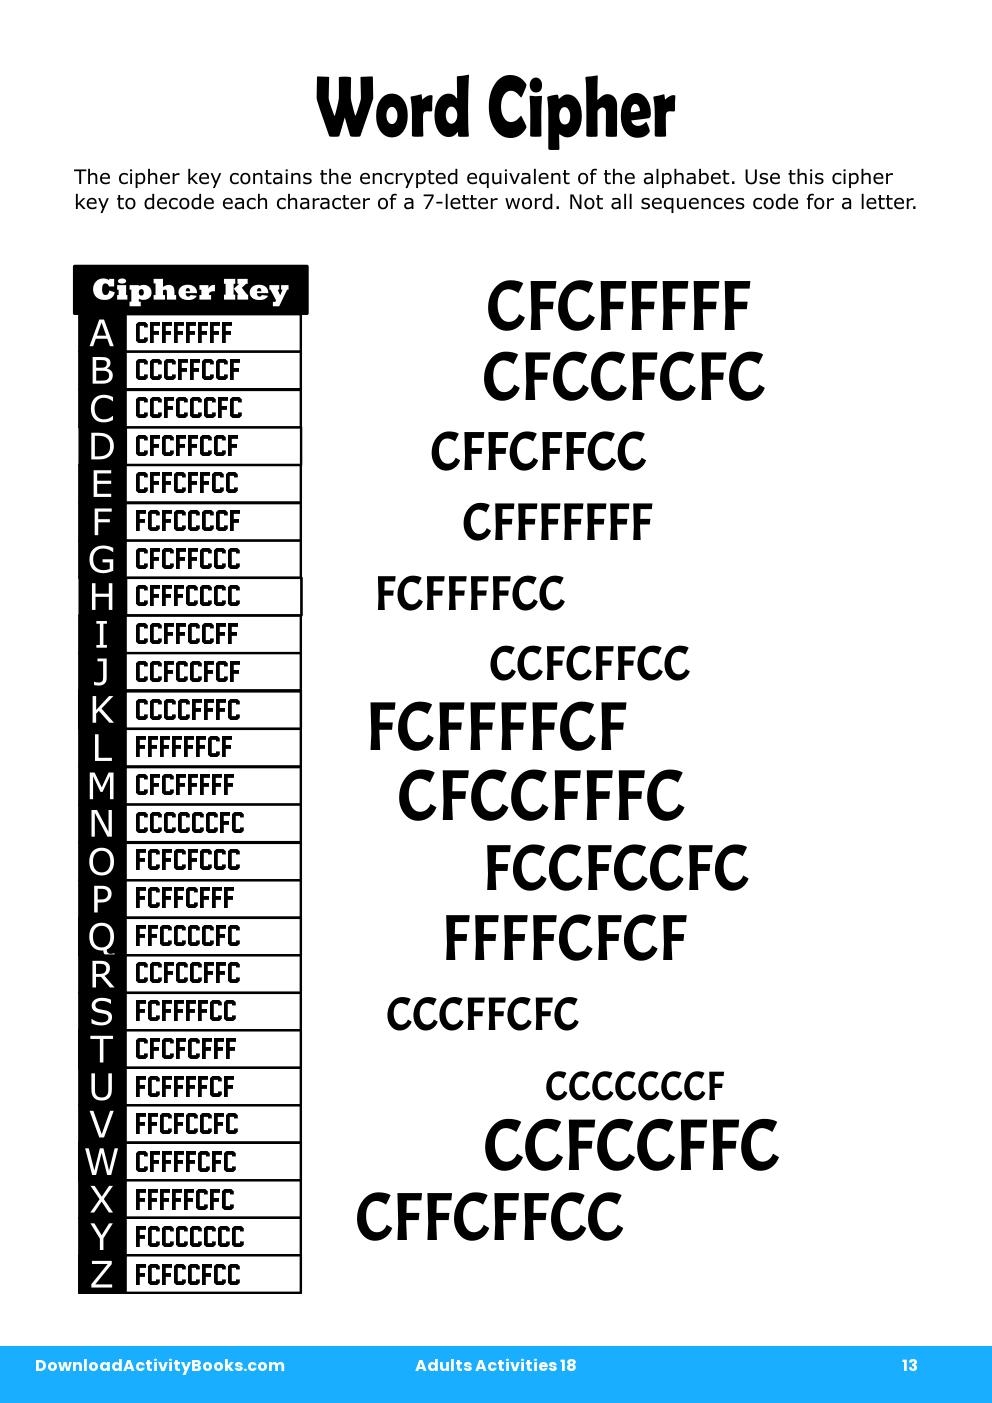 Word Cipher in Adults Activities 18